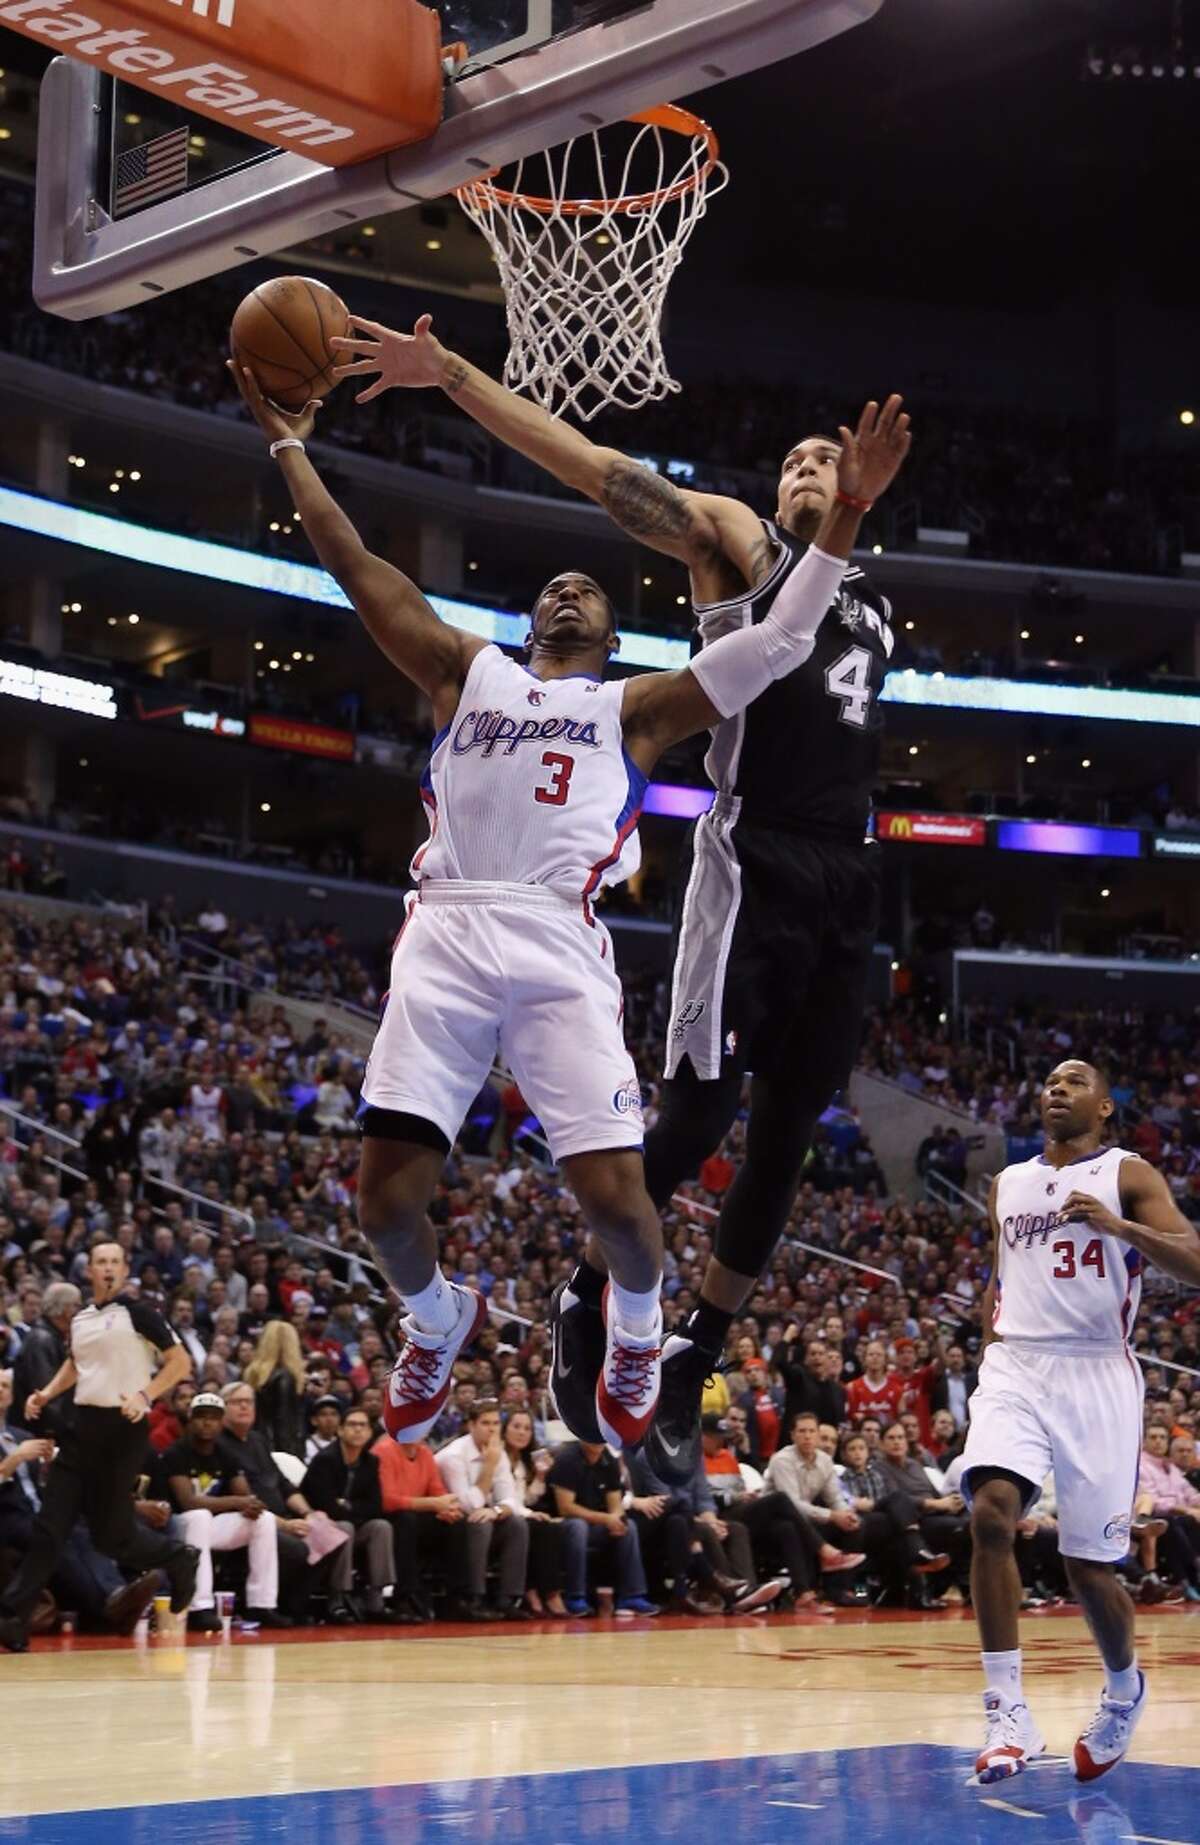 Chris Paul #3 of the Los Angeles Clippers drives past Danny Green #4 of the San Antonio Spurs for a lay up in the first half at Staples Center on December 16, 2013 in Los Angeles, California.